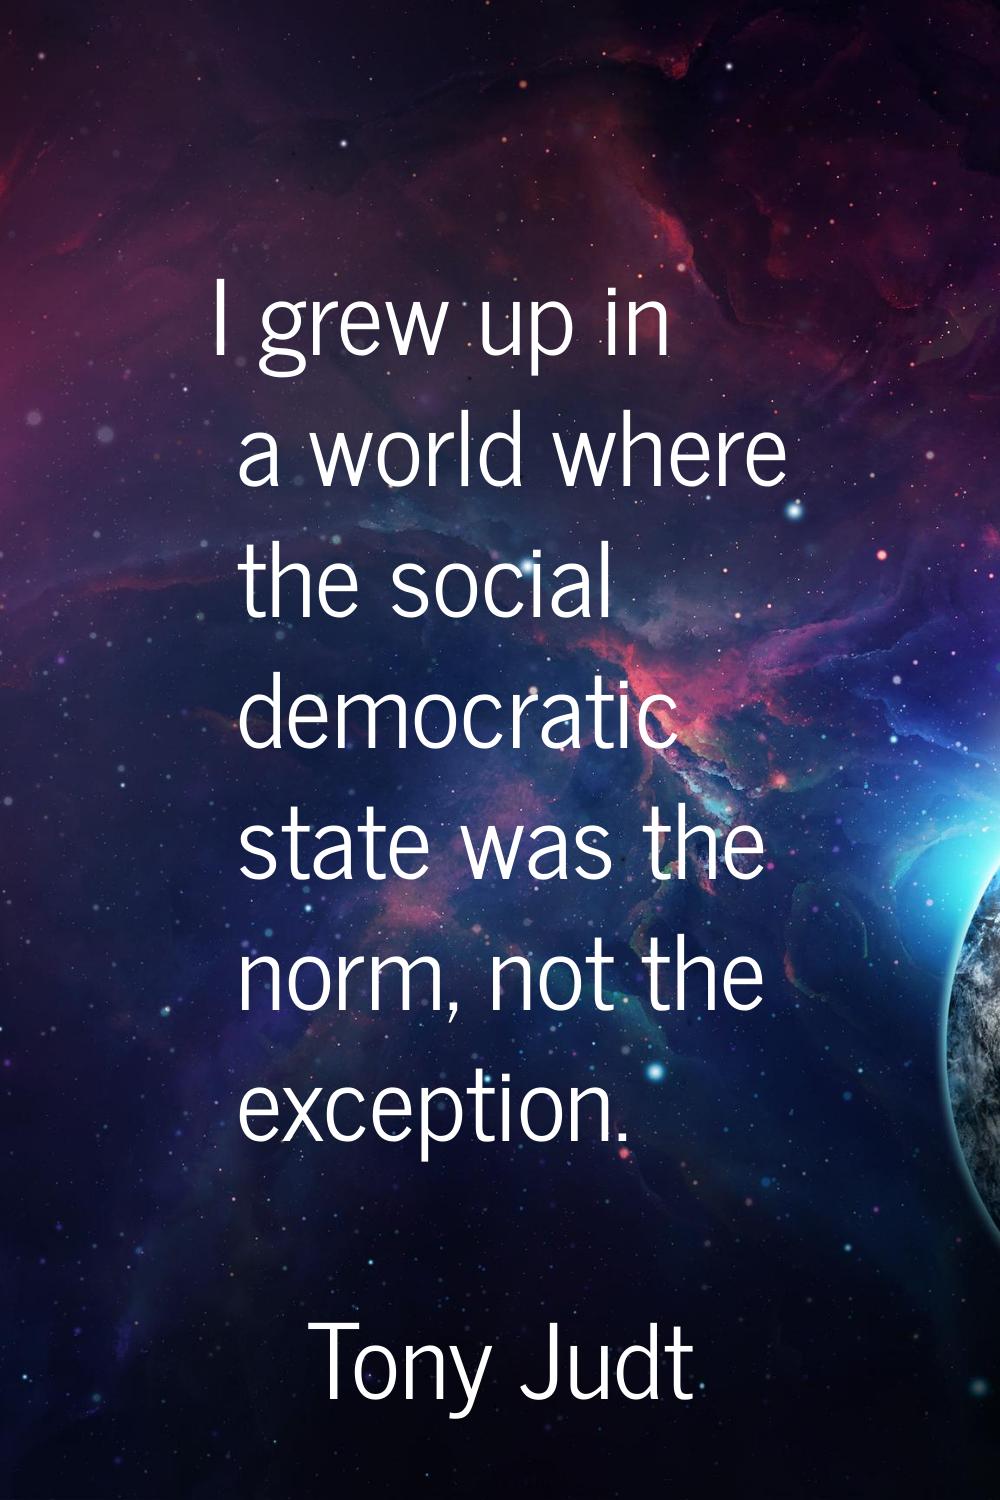 I grew up in a world where the social democratic state was the norm, not the exception.